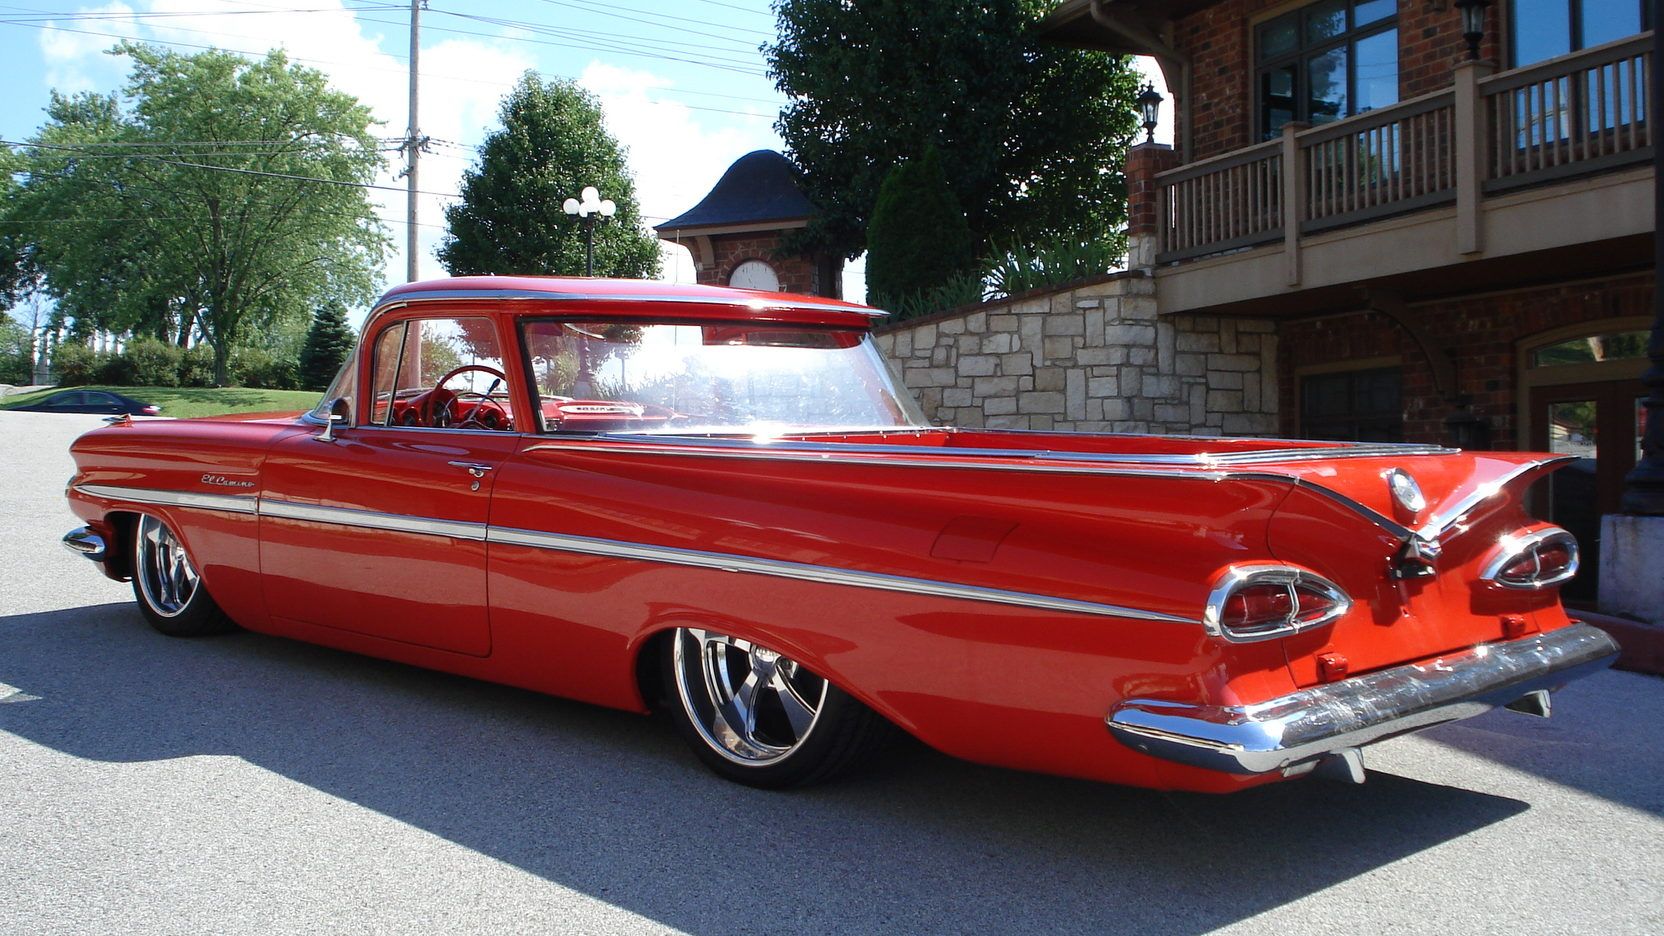 A parked red 1959 Chevy El Camino